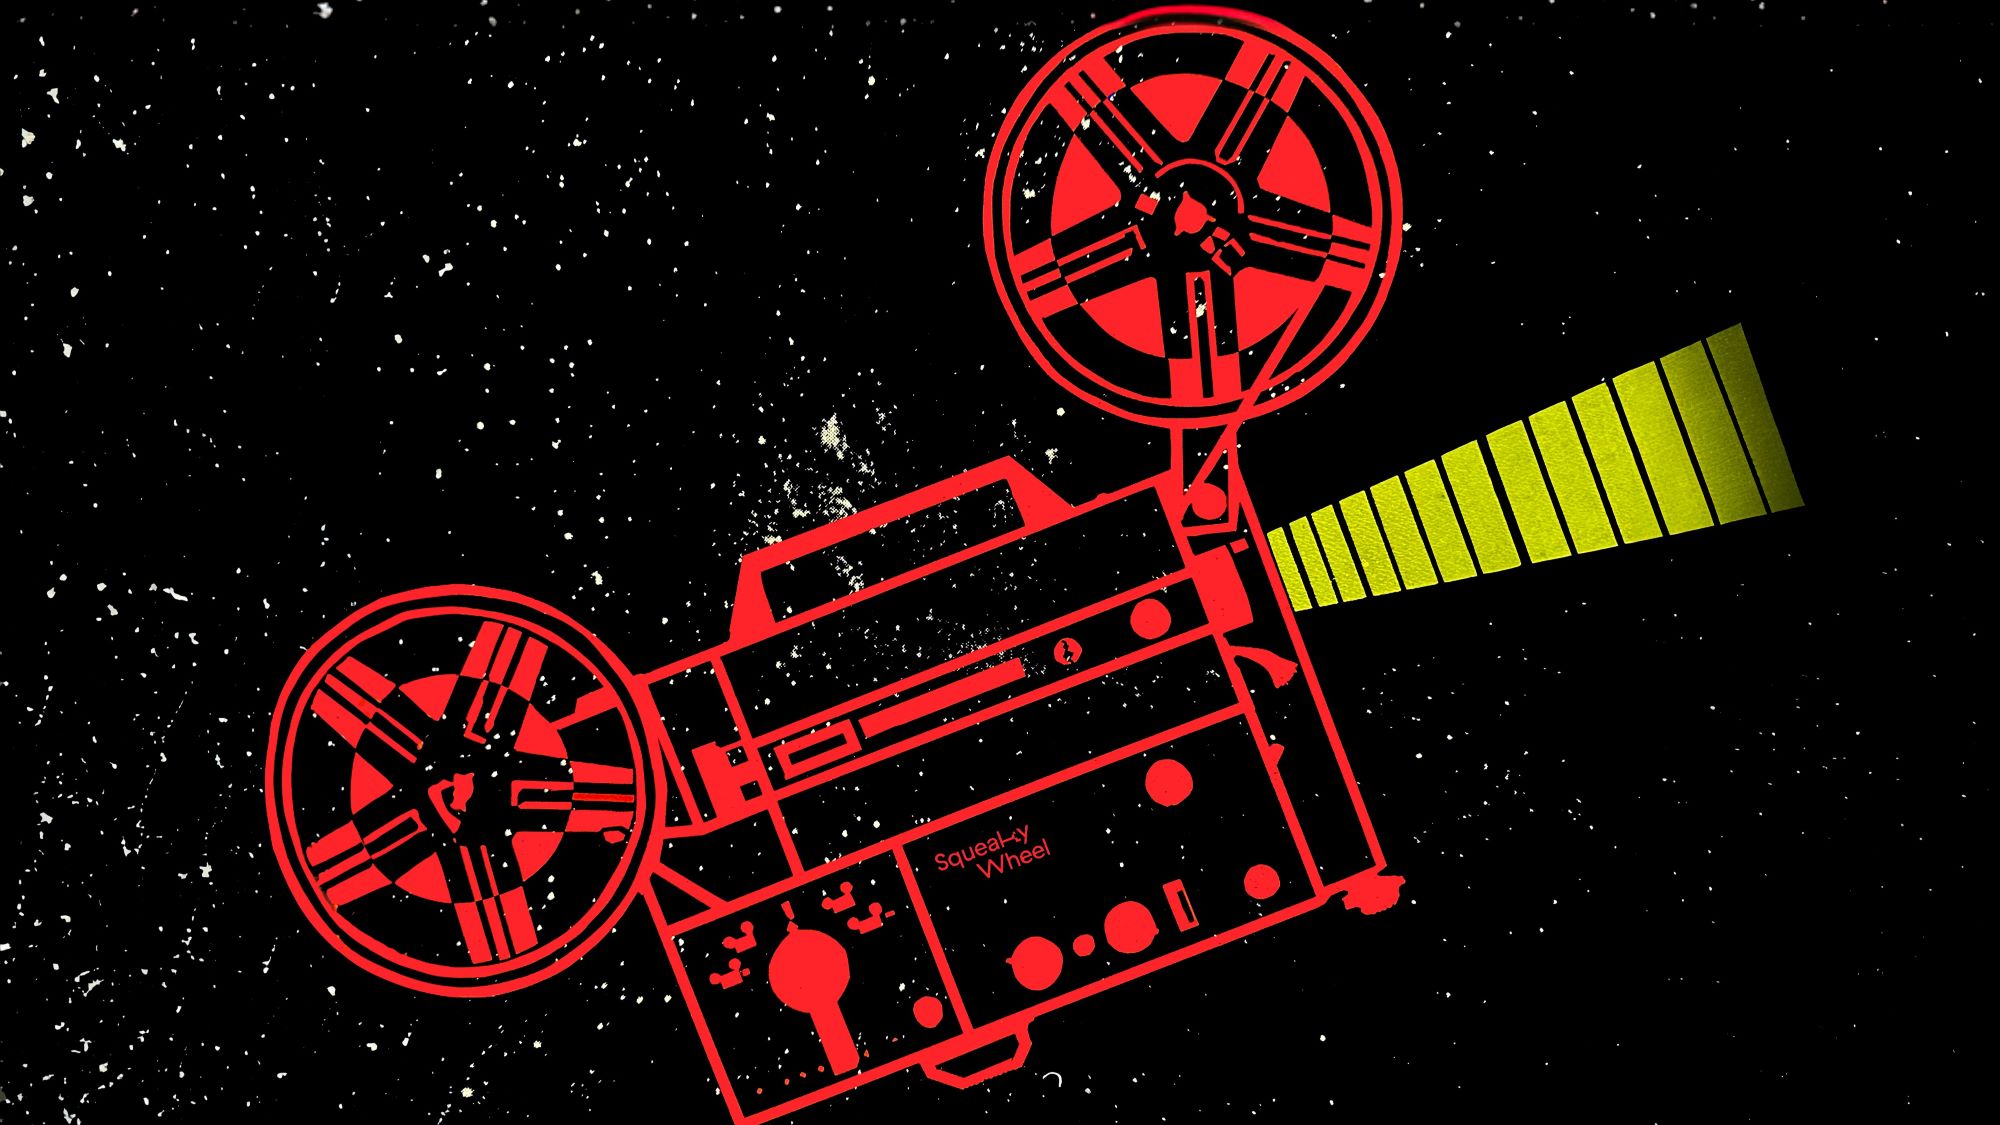 An illustration of a red film projector against a starry backdrop.